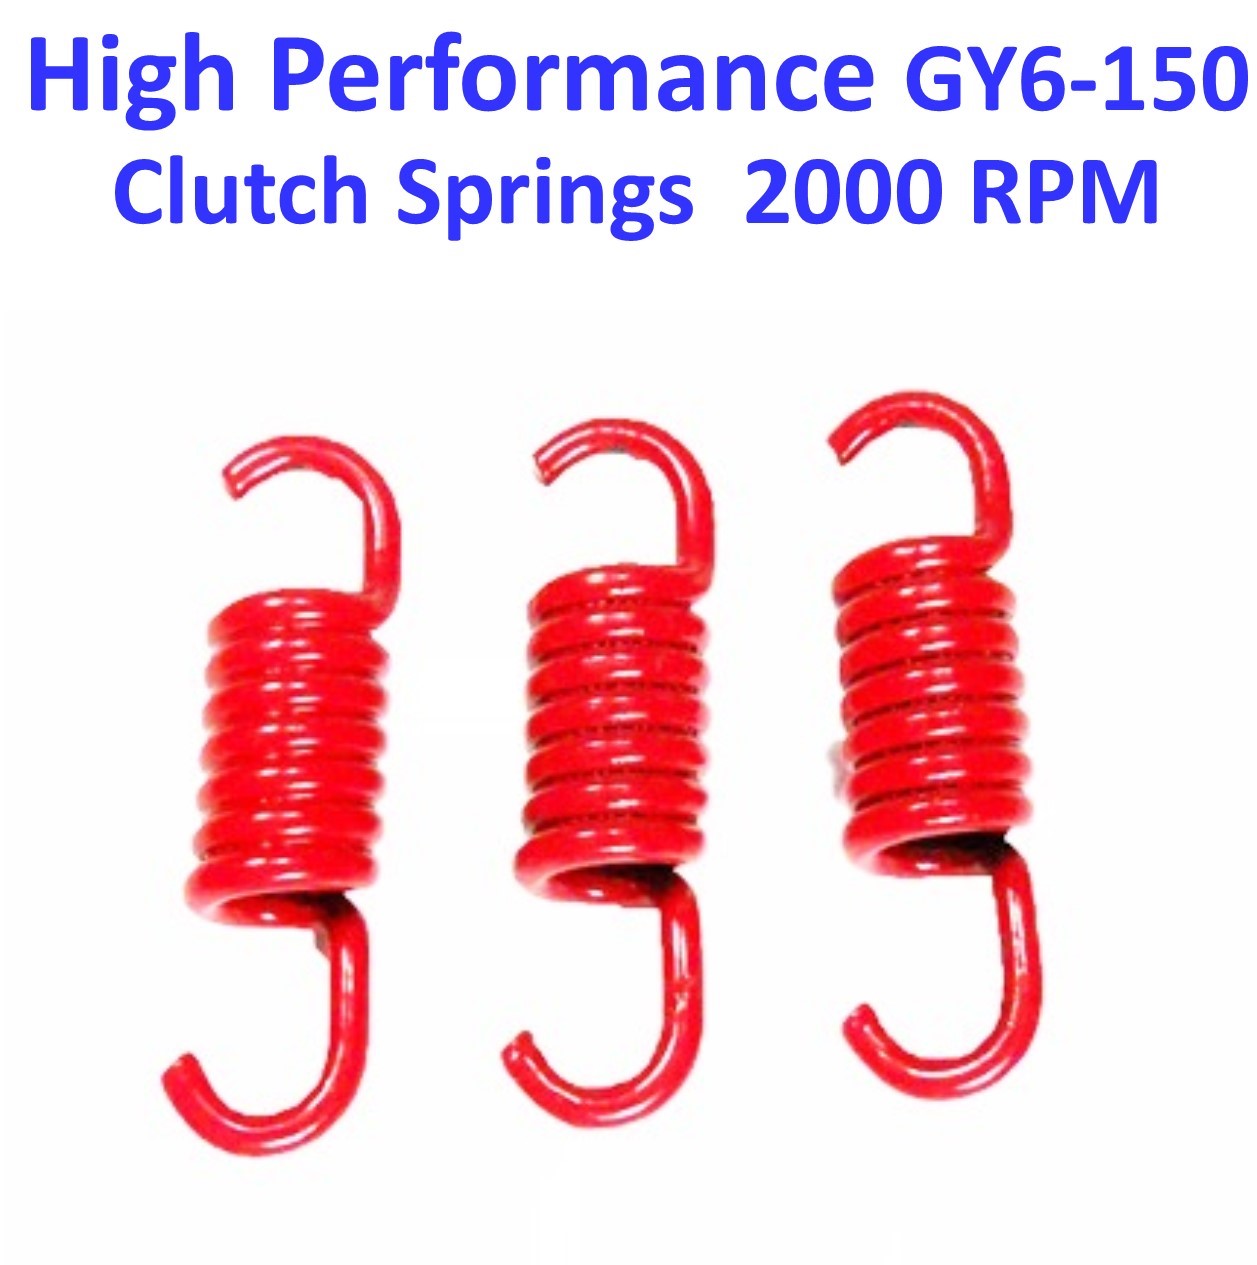 Clutch Spring Set HIGH PERFORMANCE Red +2000 RPM GY6-125, GY6-150 Chinese ATVs, GoKarts, Scooters